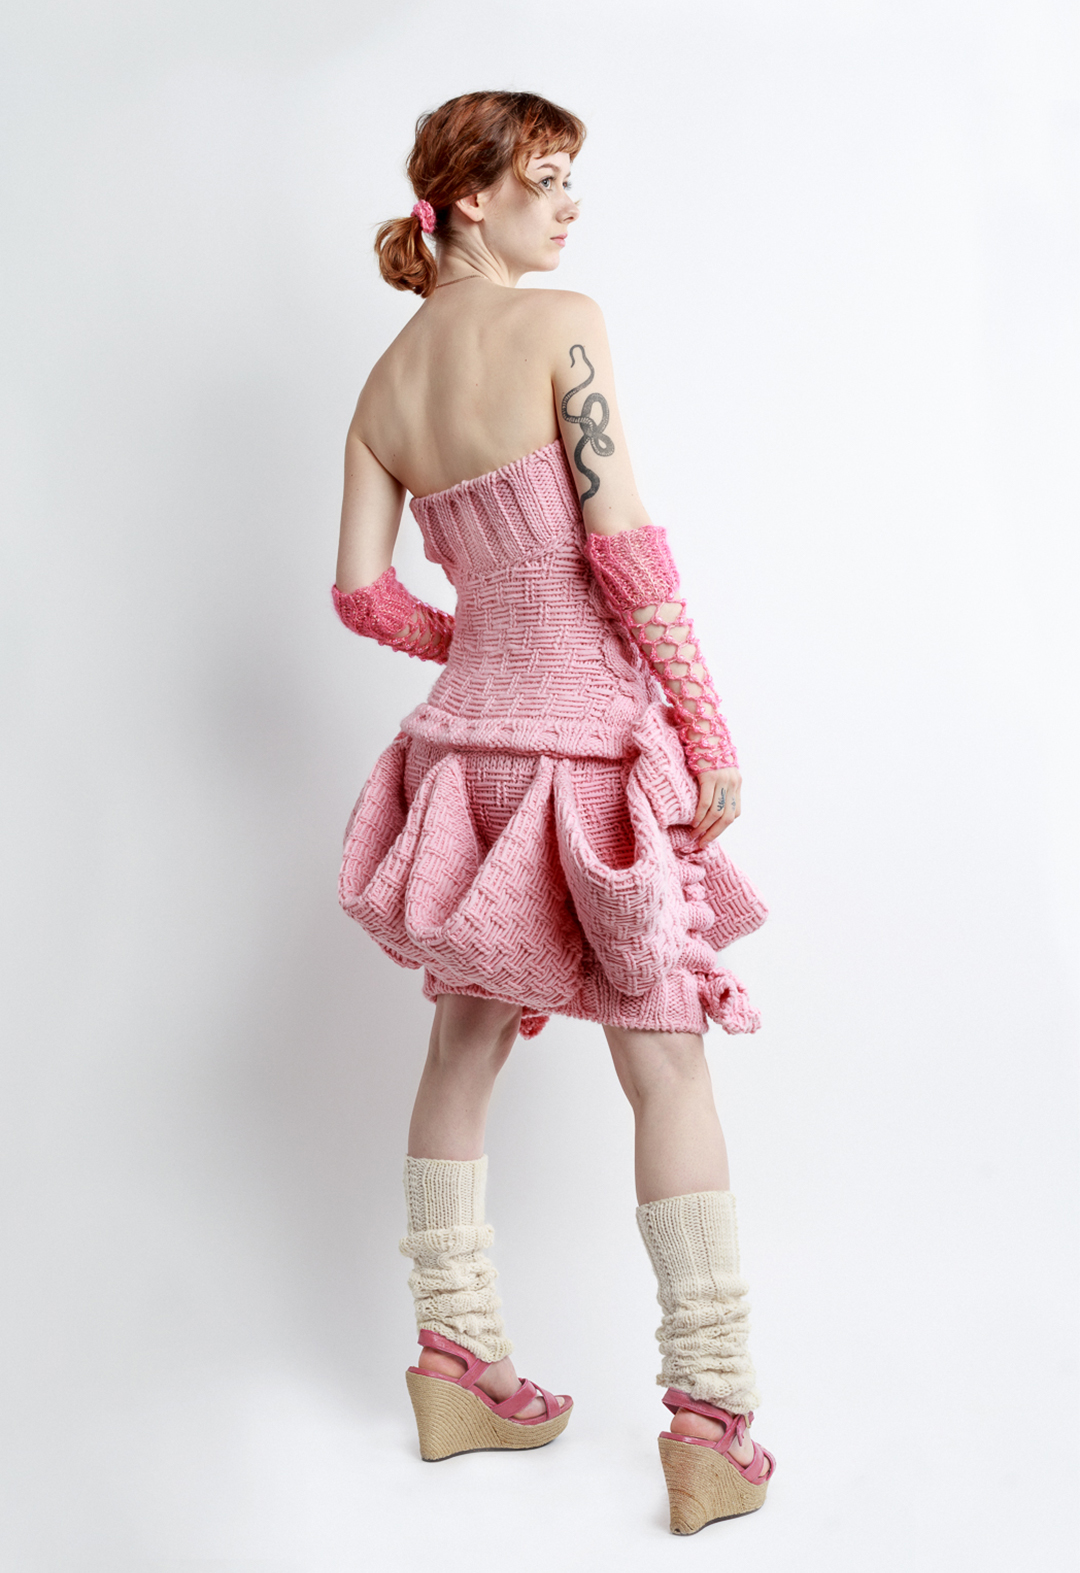 Photo of a girl posing in a pink sleeveless magical girl mini dress, looking to the side. The dress is hand knit with baby pink pink wool. The dress features big bows and big pockets circling the skirt of the dress. The dress, and girl, are posed at a three-quarter back view to the camera. The girl is wearing crochet fishnet gloves, heels, leg warmers, pigtails, and a heart necklace. The girl has her far arm raised slightly.